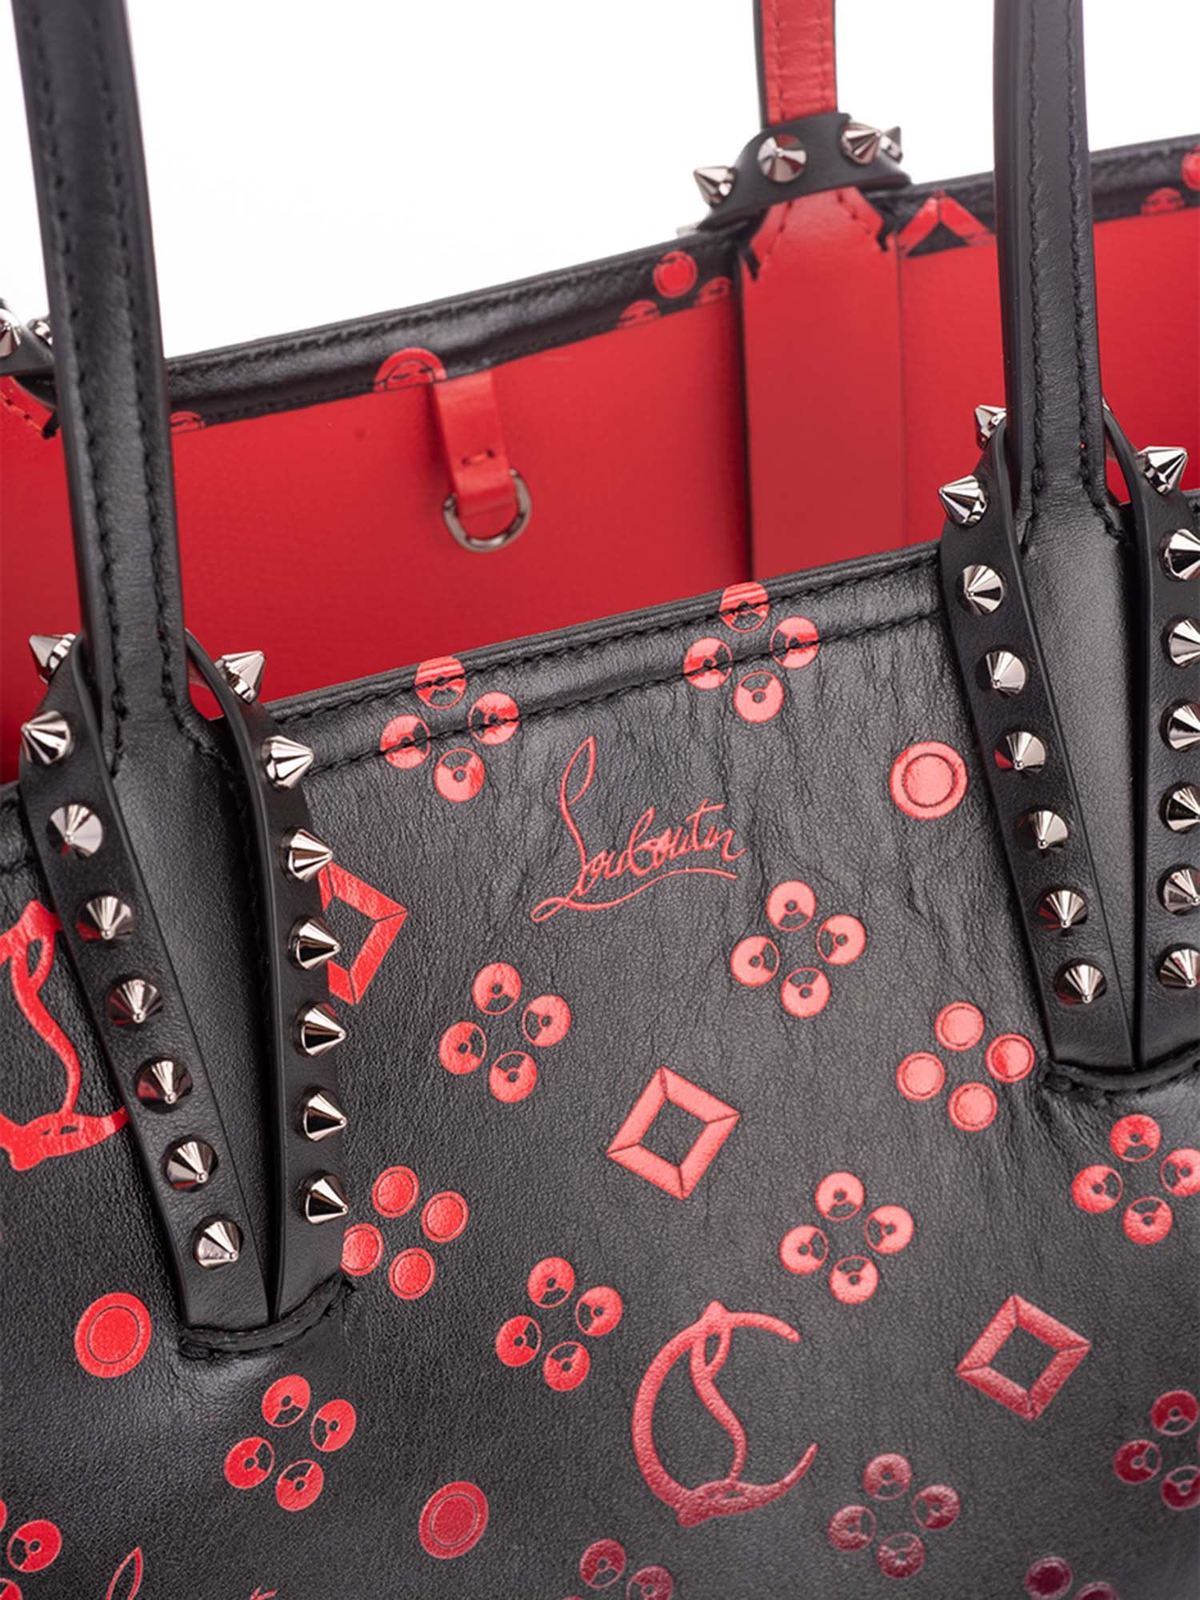 Totes bags Christian Louboutin - Cabata shopper bag in black and red -  3195373M315